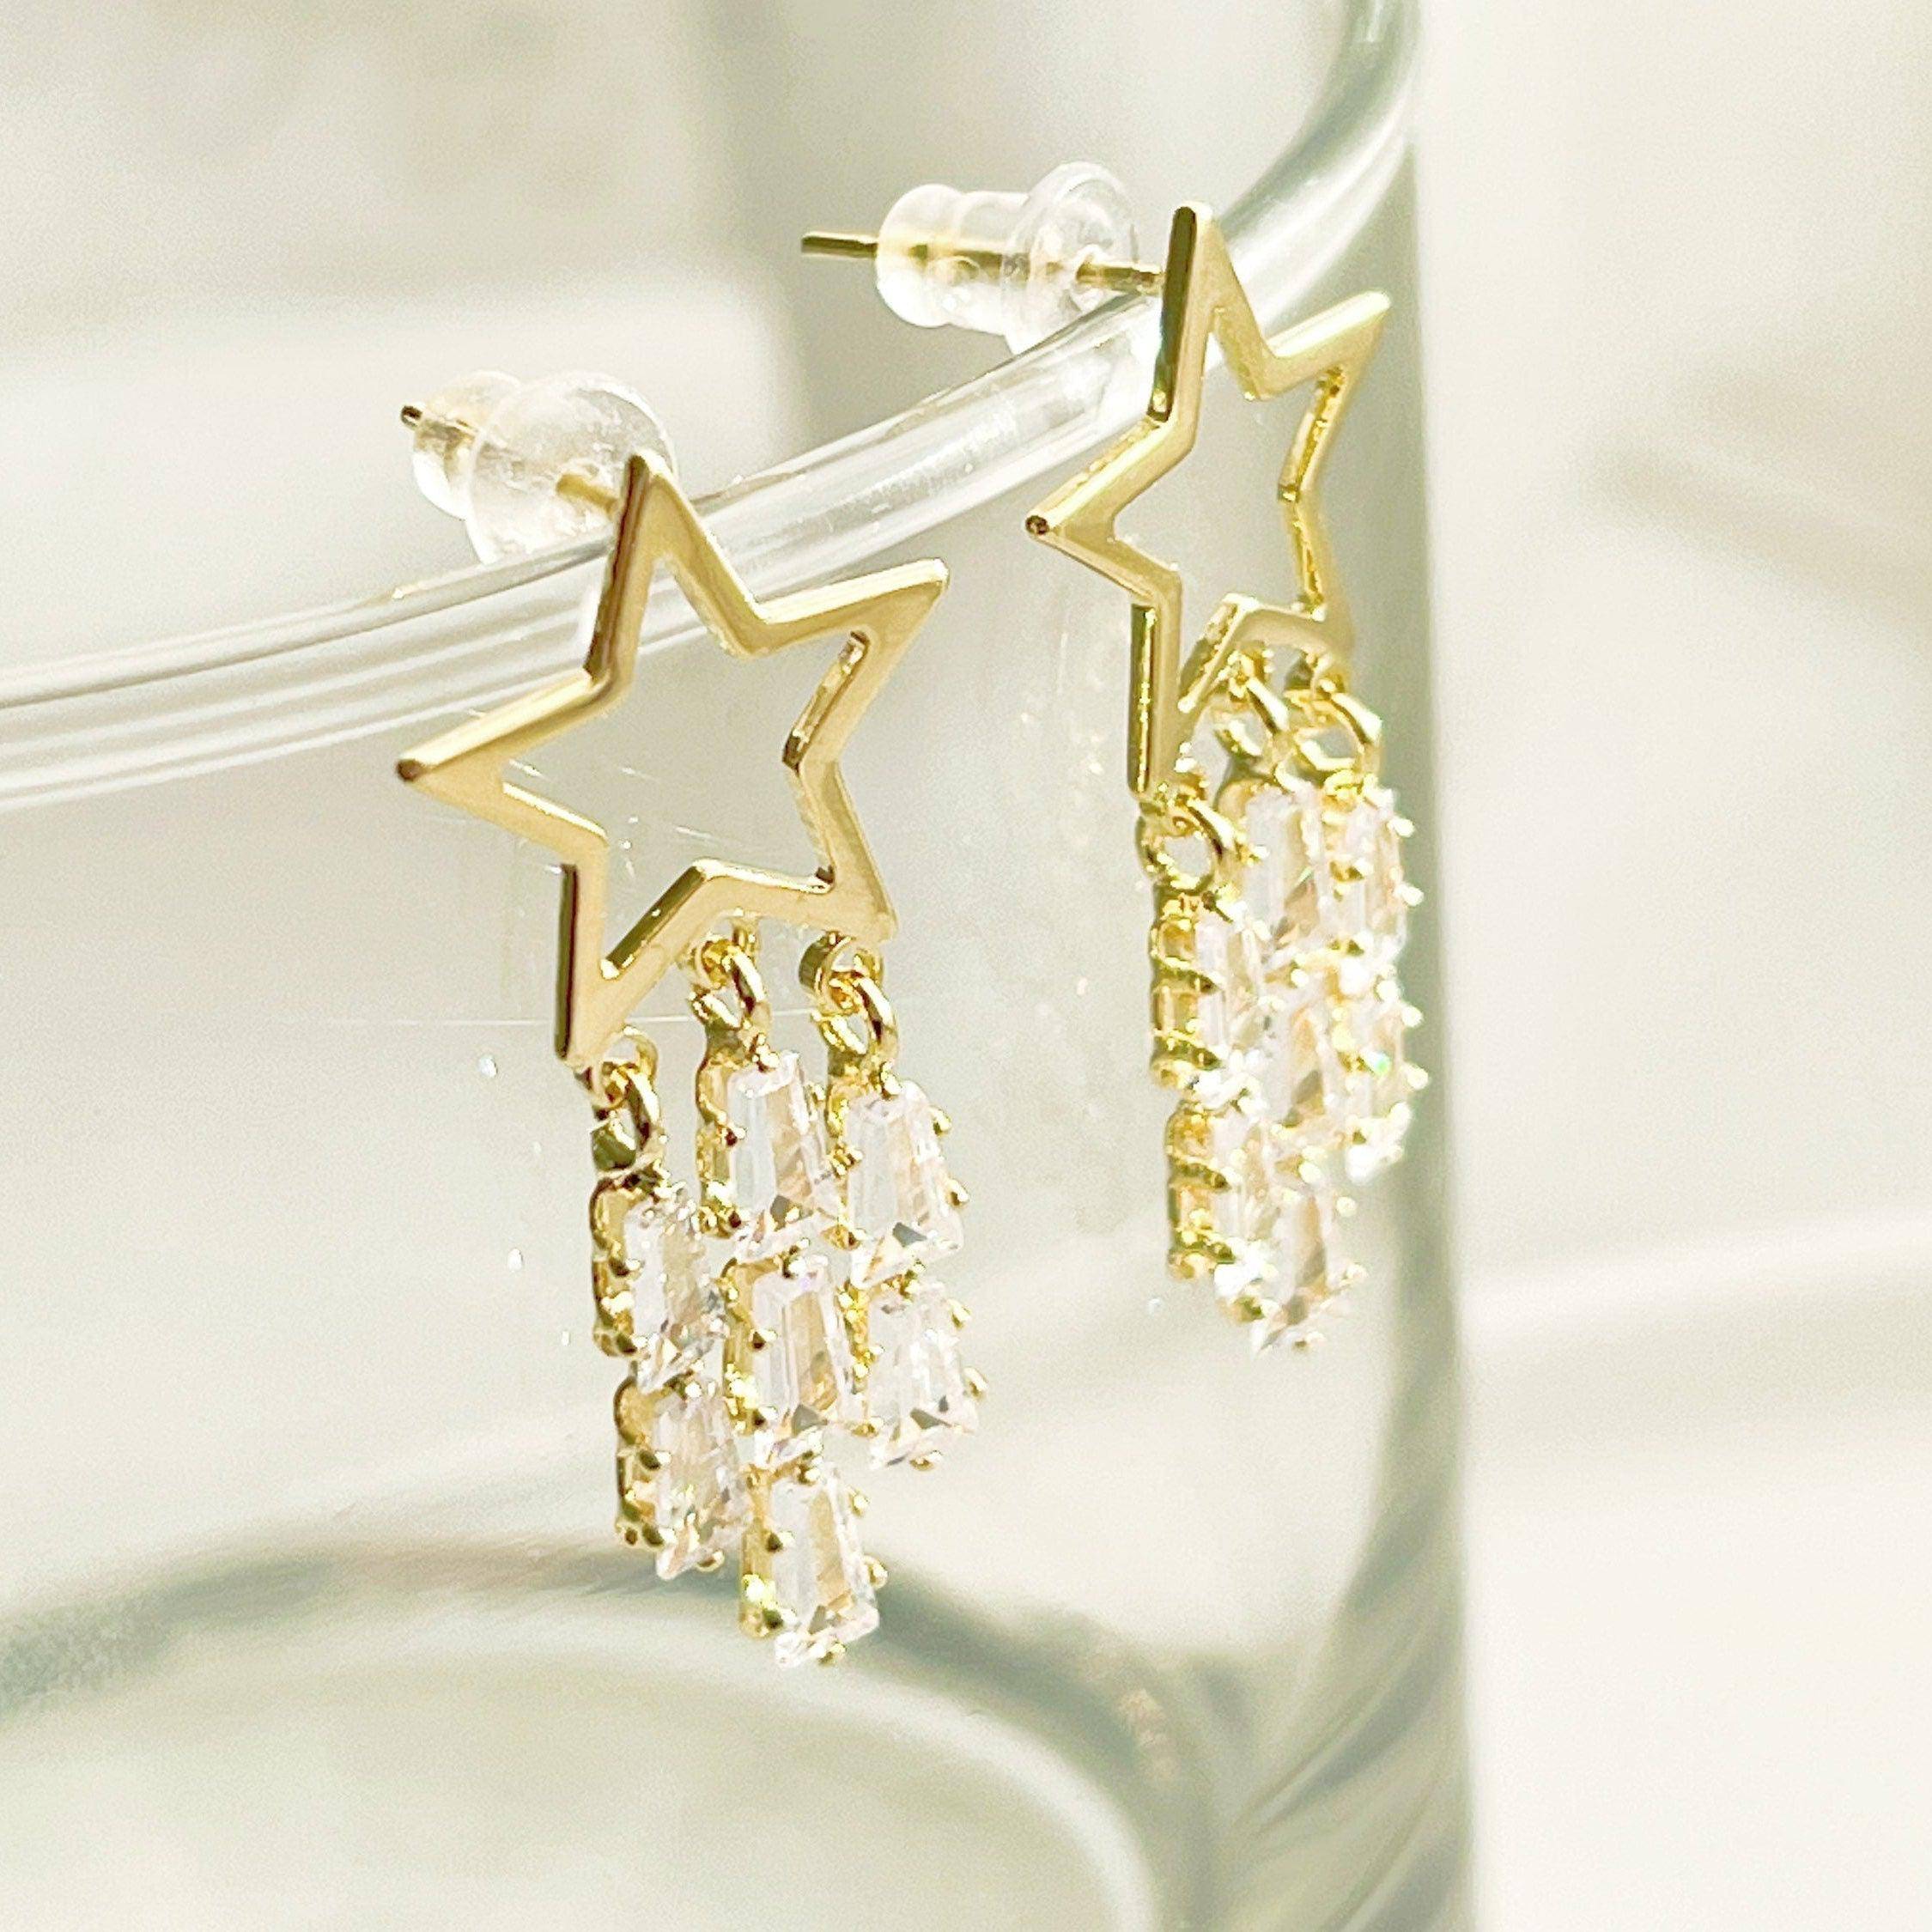 Golden Shooting Stars Earrings  - Star with Three Crystal Tails Stud - Jewelry & Watches - Bijou Her -  -  - 